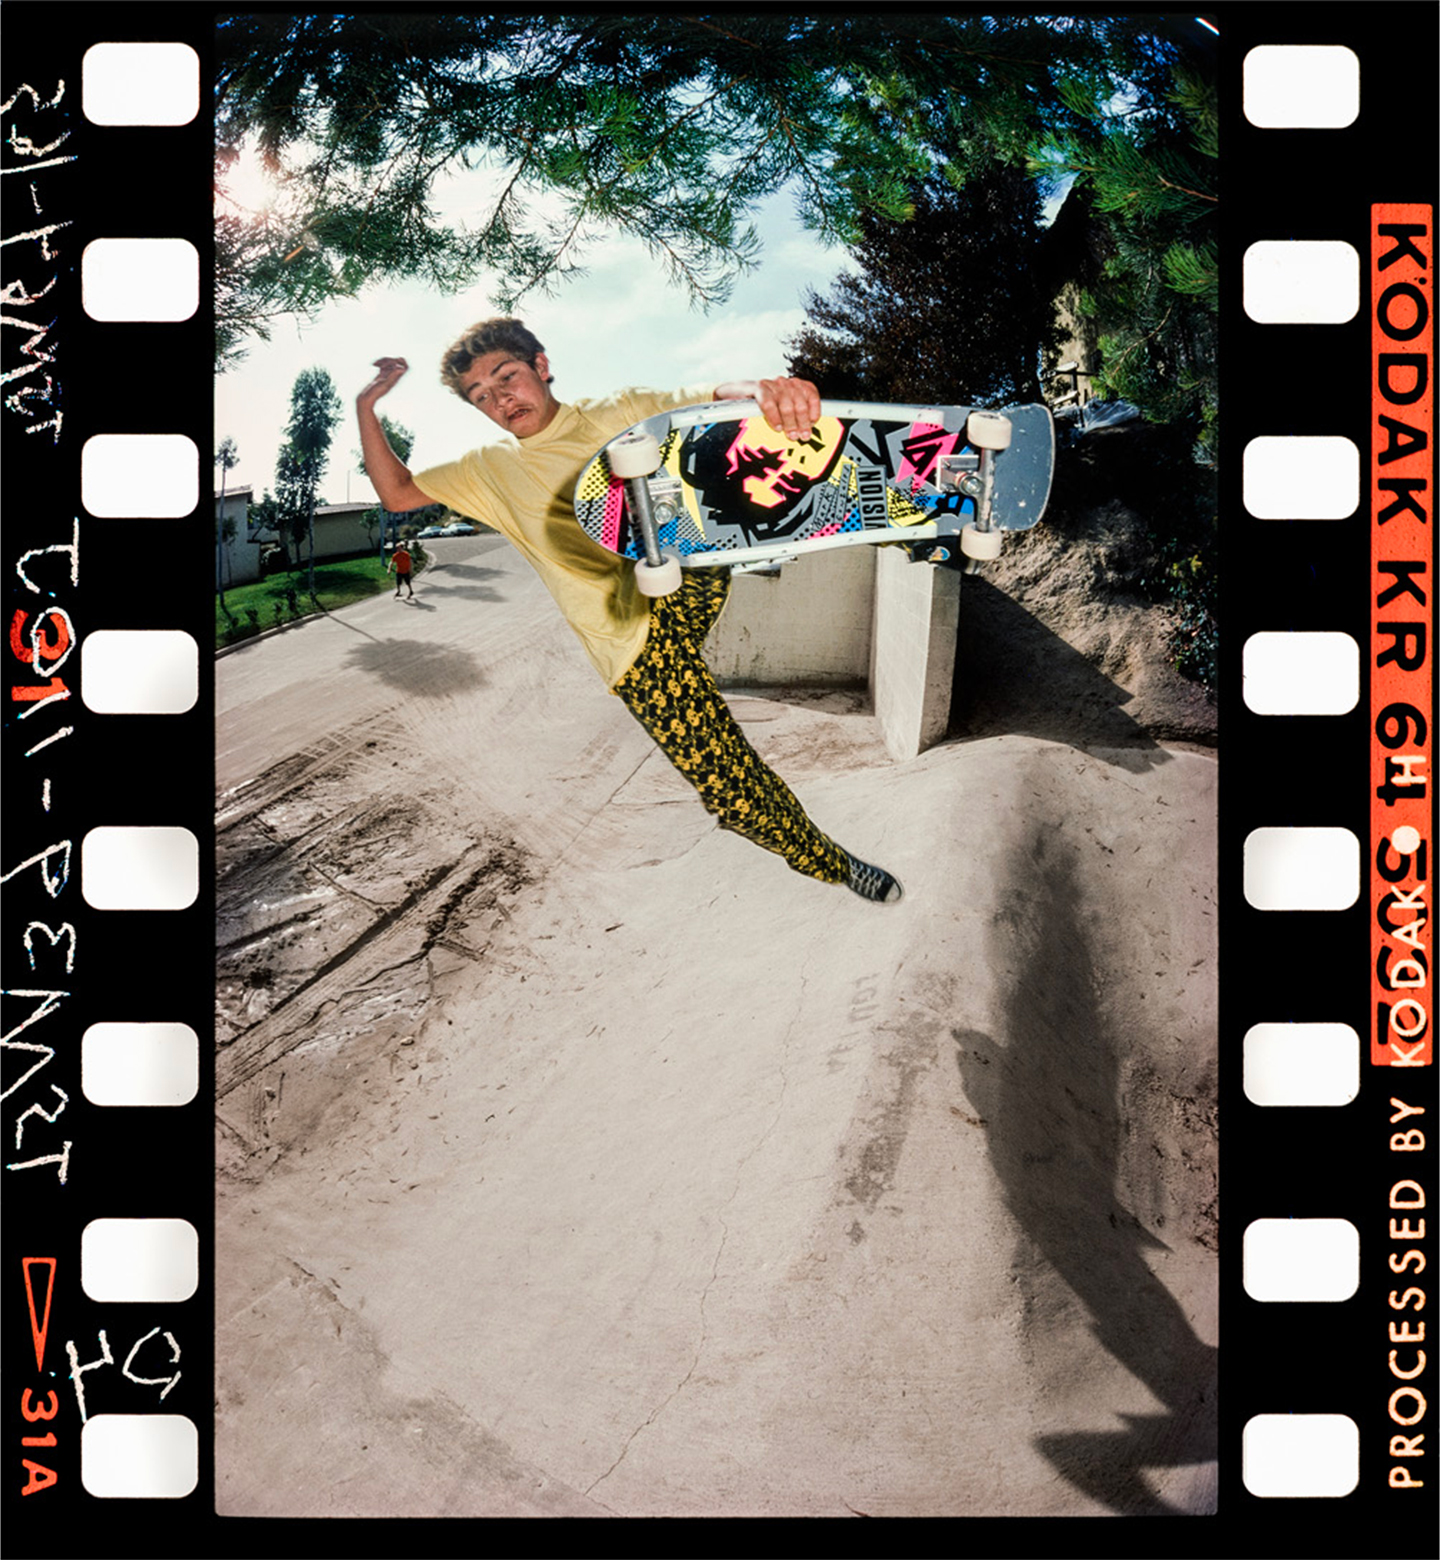 Mark Gonzales, Gemco Bank, frontside boneless, 1985. Photograph by Grant Brittain. Image Courtesy of The Design Museum